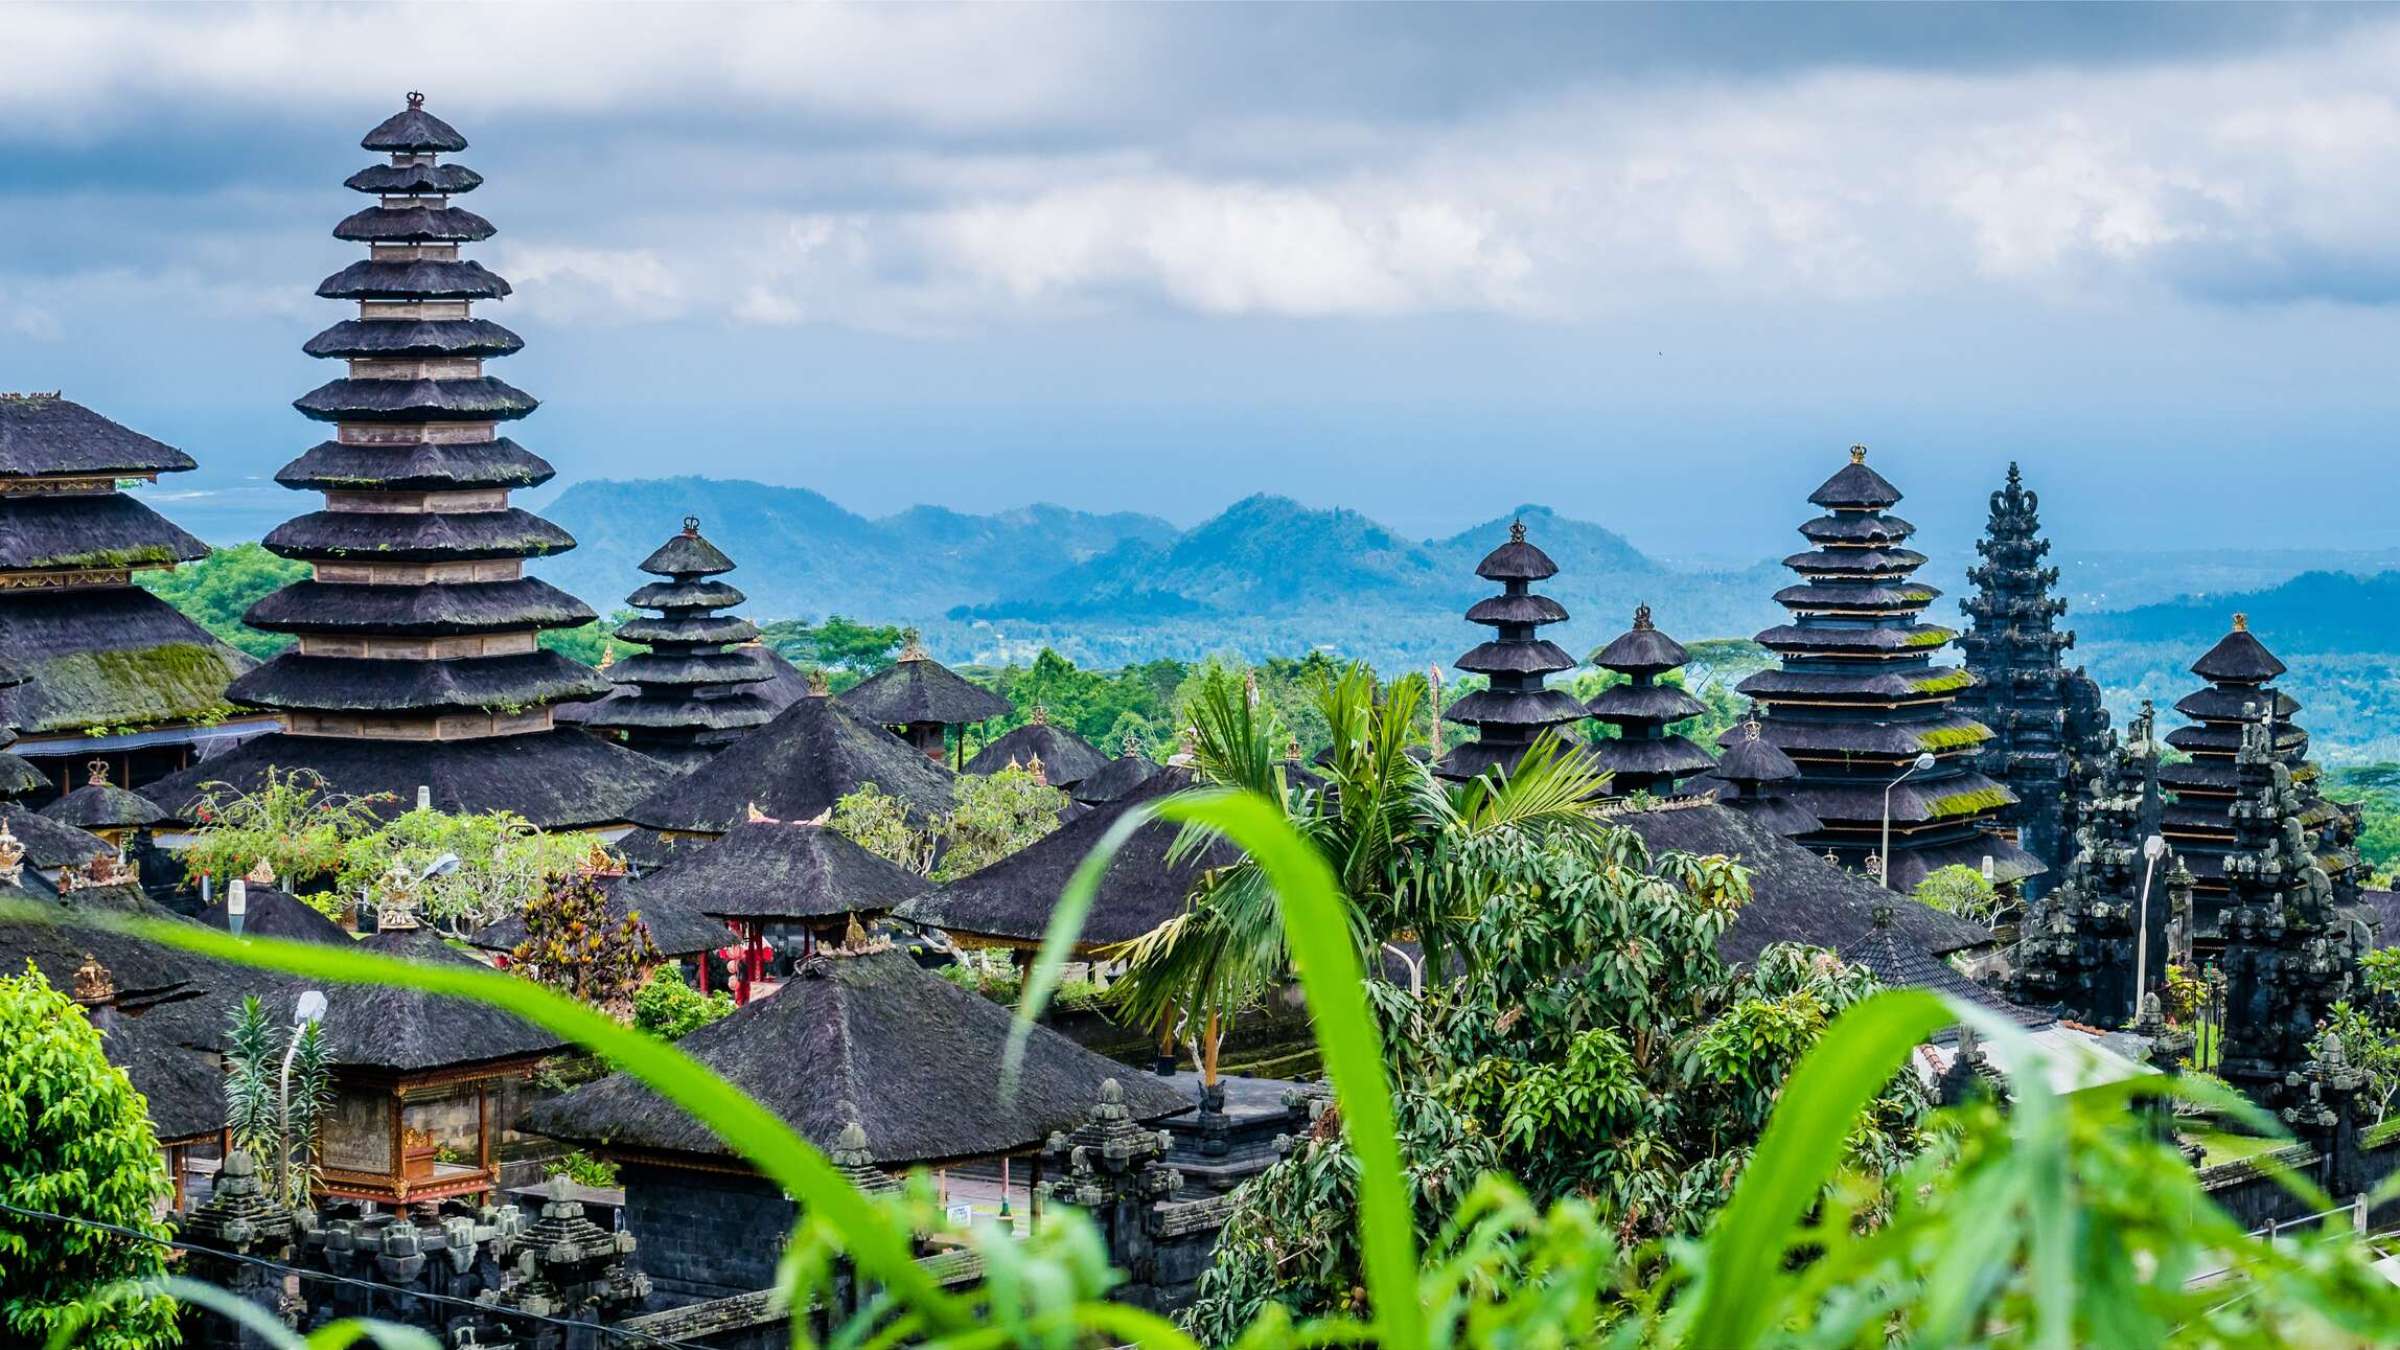 landscape picture of Balinese temples and greenery with mountains in the background